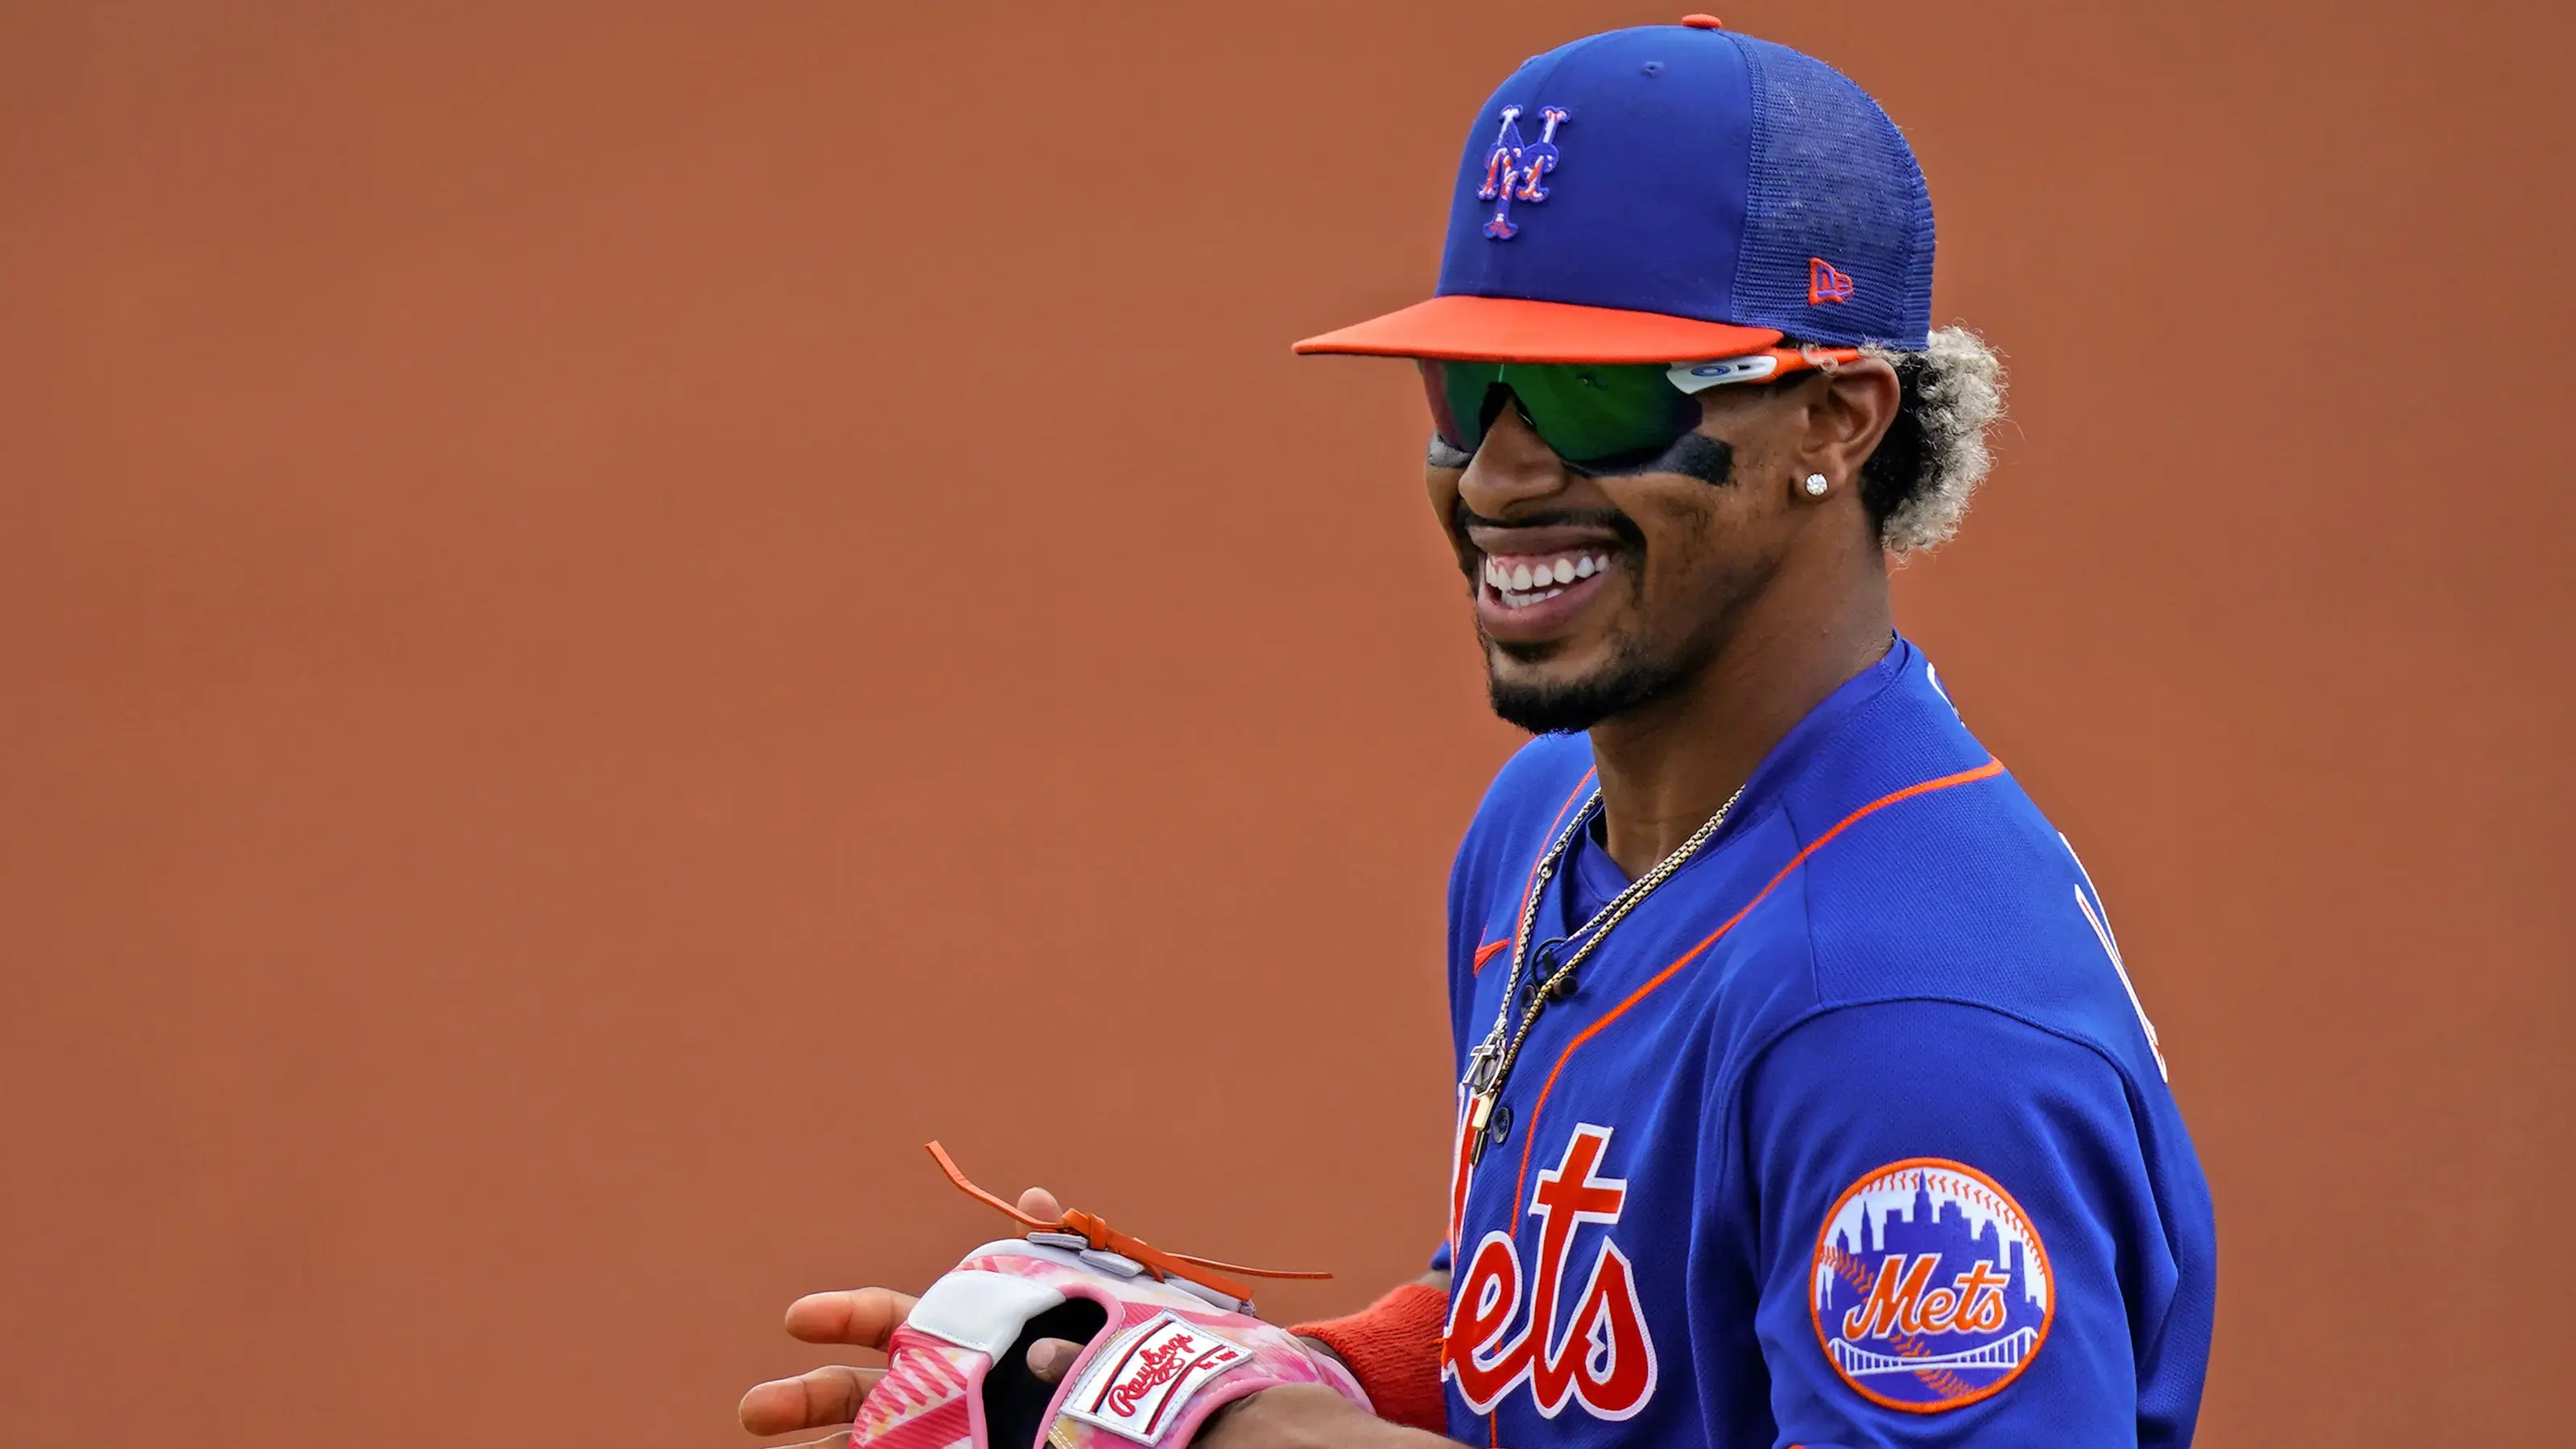 Mar 16, 2021; Port St. Lucie, Florida, USA; New York Mets shortstop Francisco Lindor (12) warms up prior to the spring training game against the Houston Astros at Clover Park. / Jasen Vinlove-USA TODAY Sports